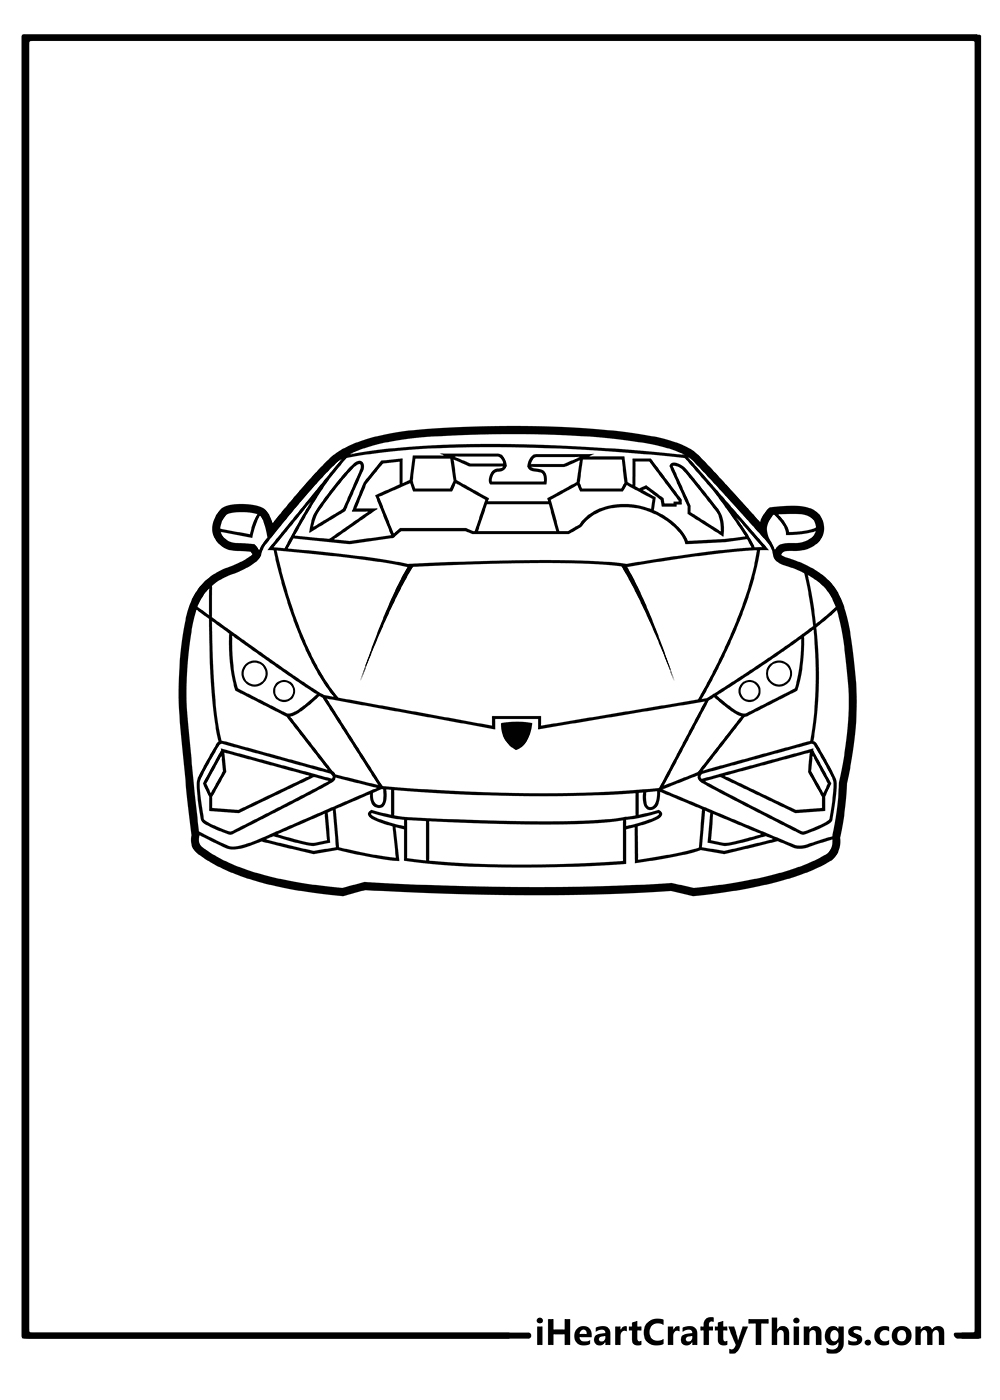 Printable Lamborghini Coloring Pages Updated 20